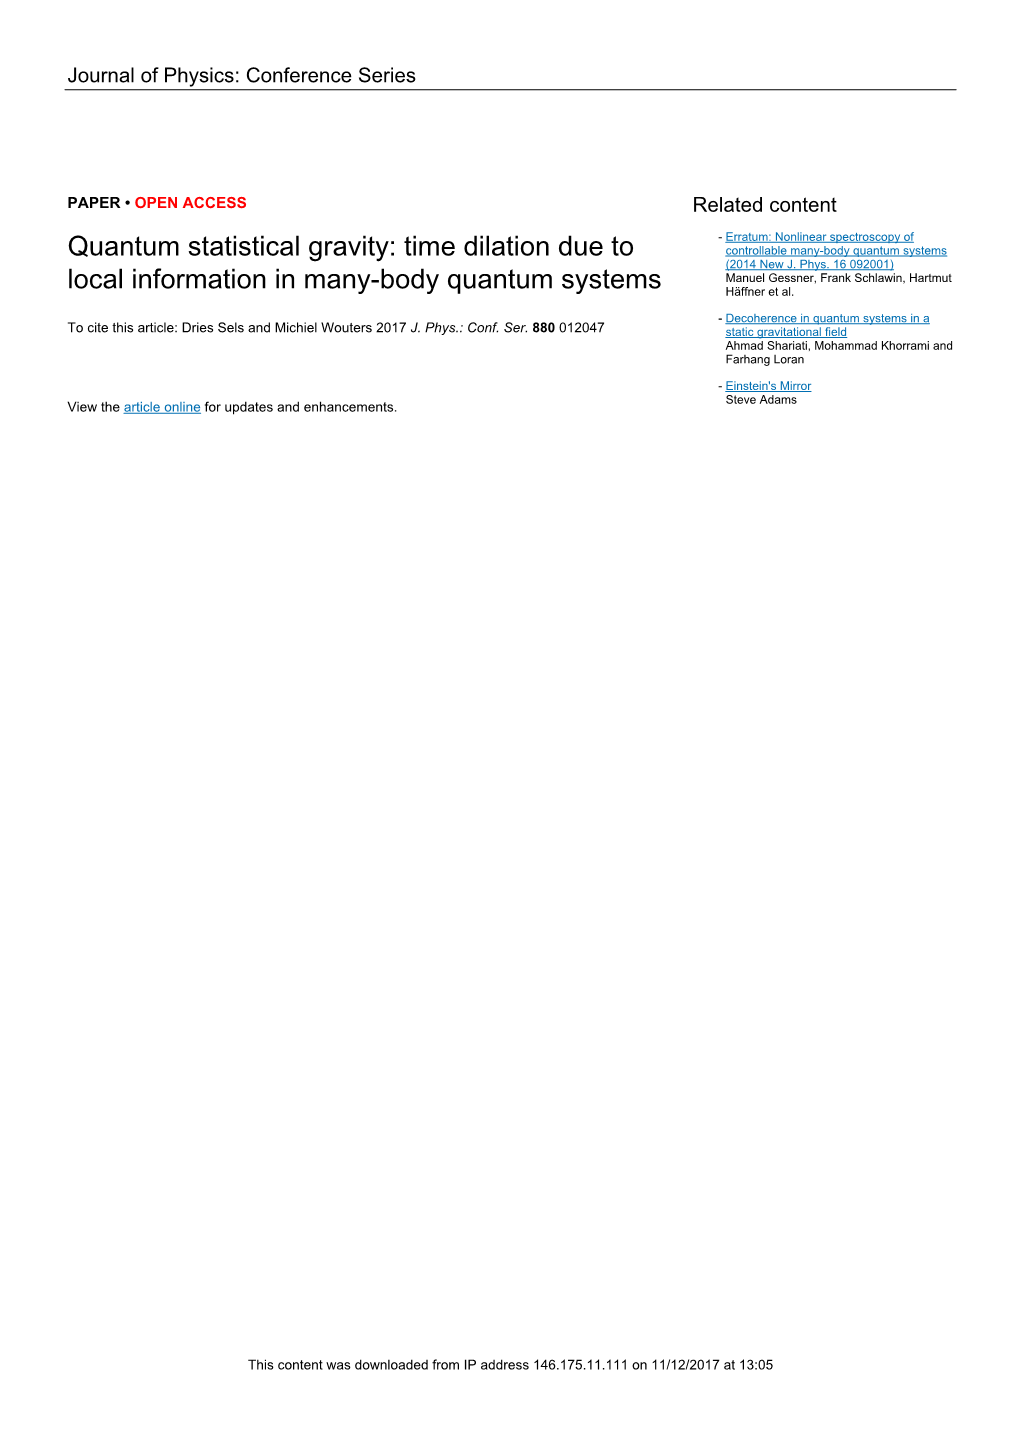 Quantum Statistical Gravity: Time Dilation Due to Controllable Many-Body Quantum Systems (2014 New J